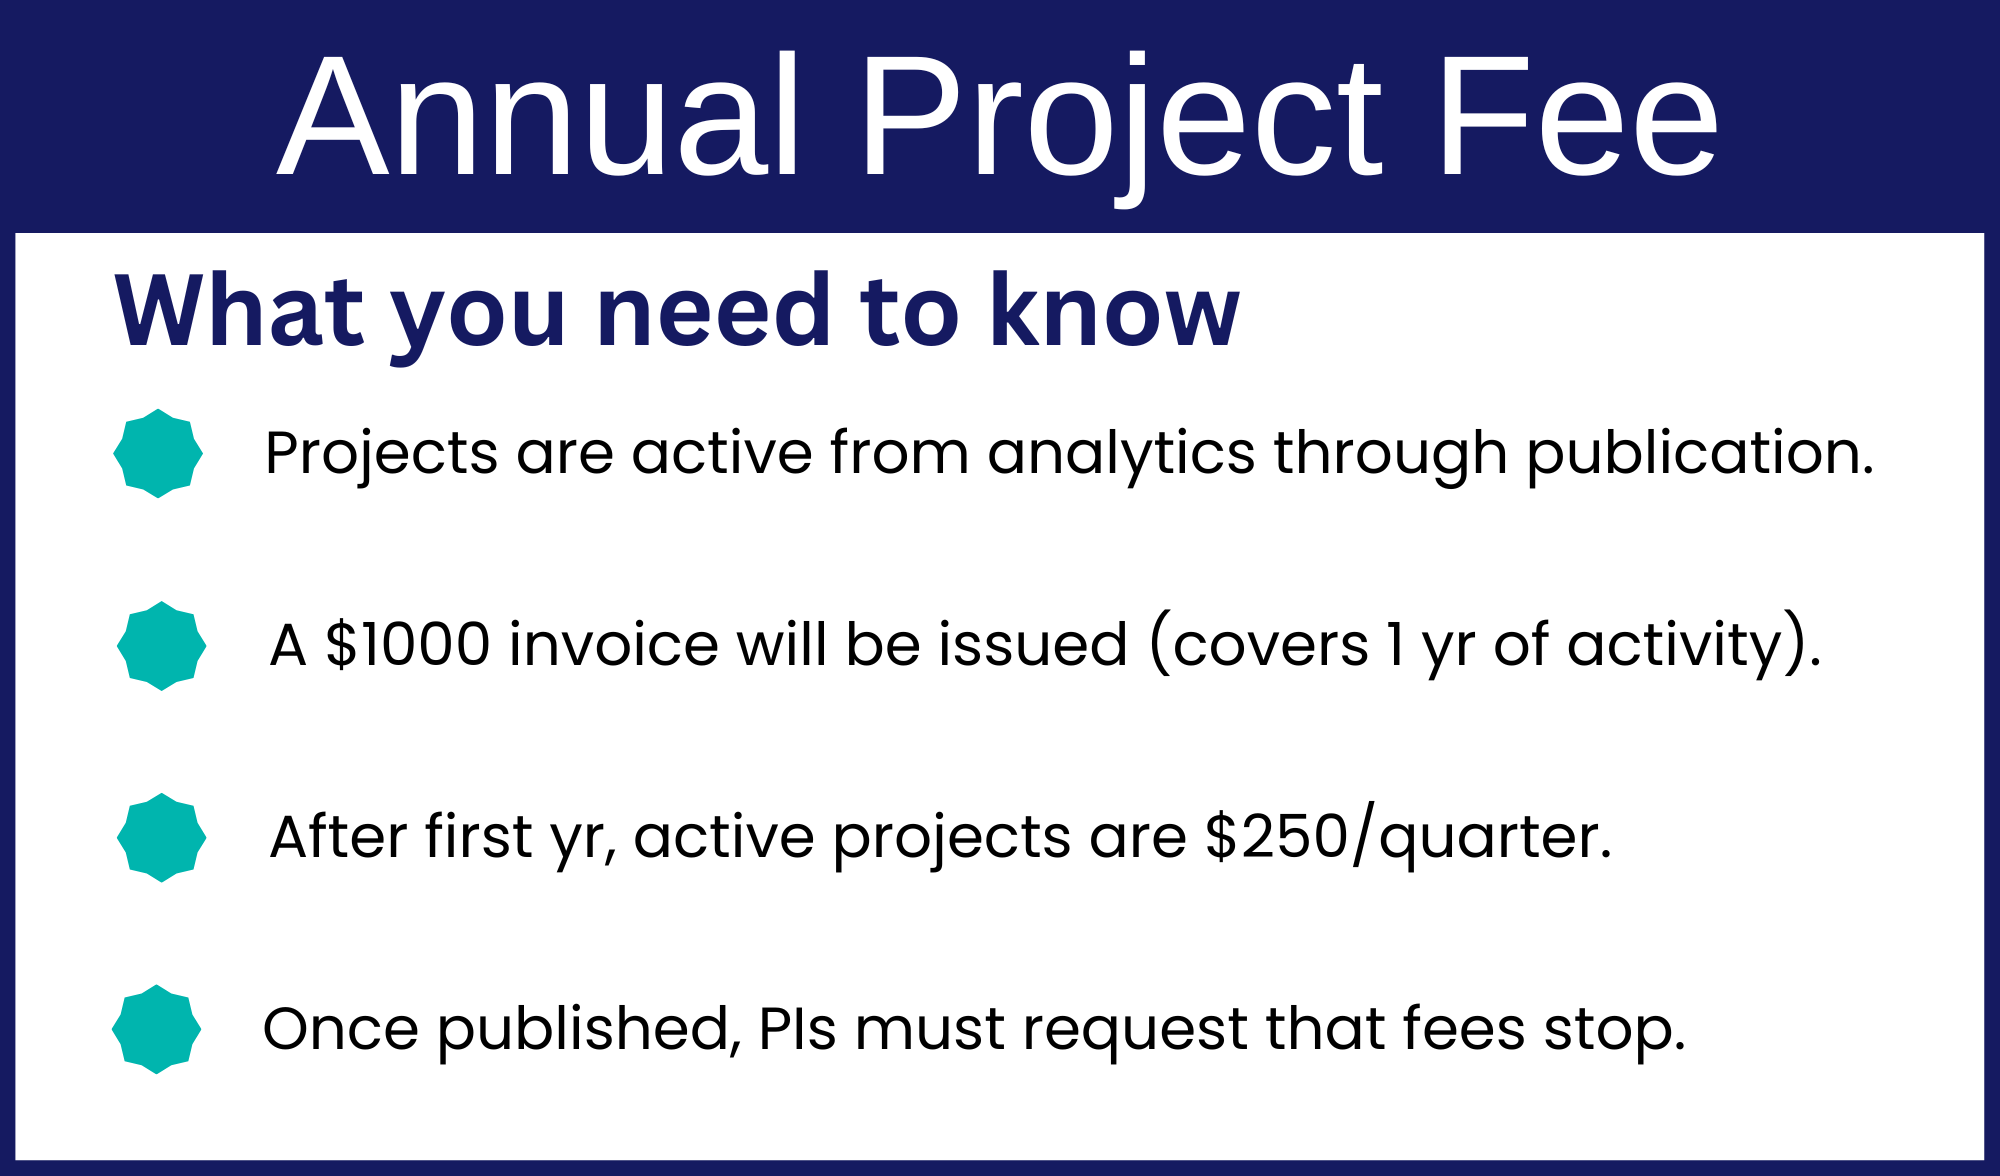 Annual Project Fee Infographic: Projects are active from analytics through publication; a $1000 invoice will be issued (covers 1 year of activity); after first year, active projects are $250 eachquarter; Once published, PIs must request that fees stop.